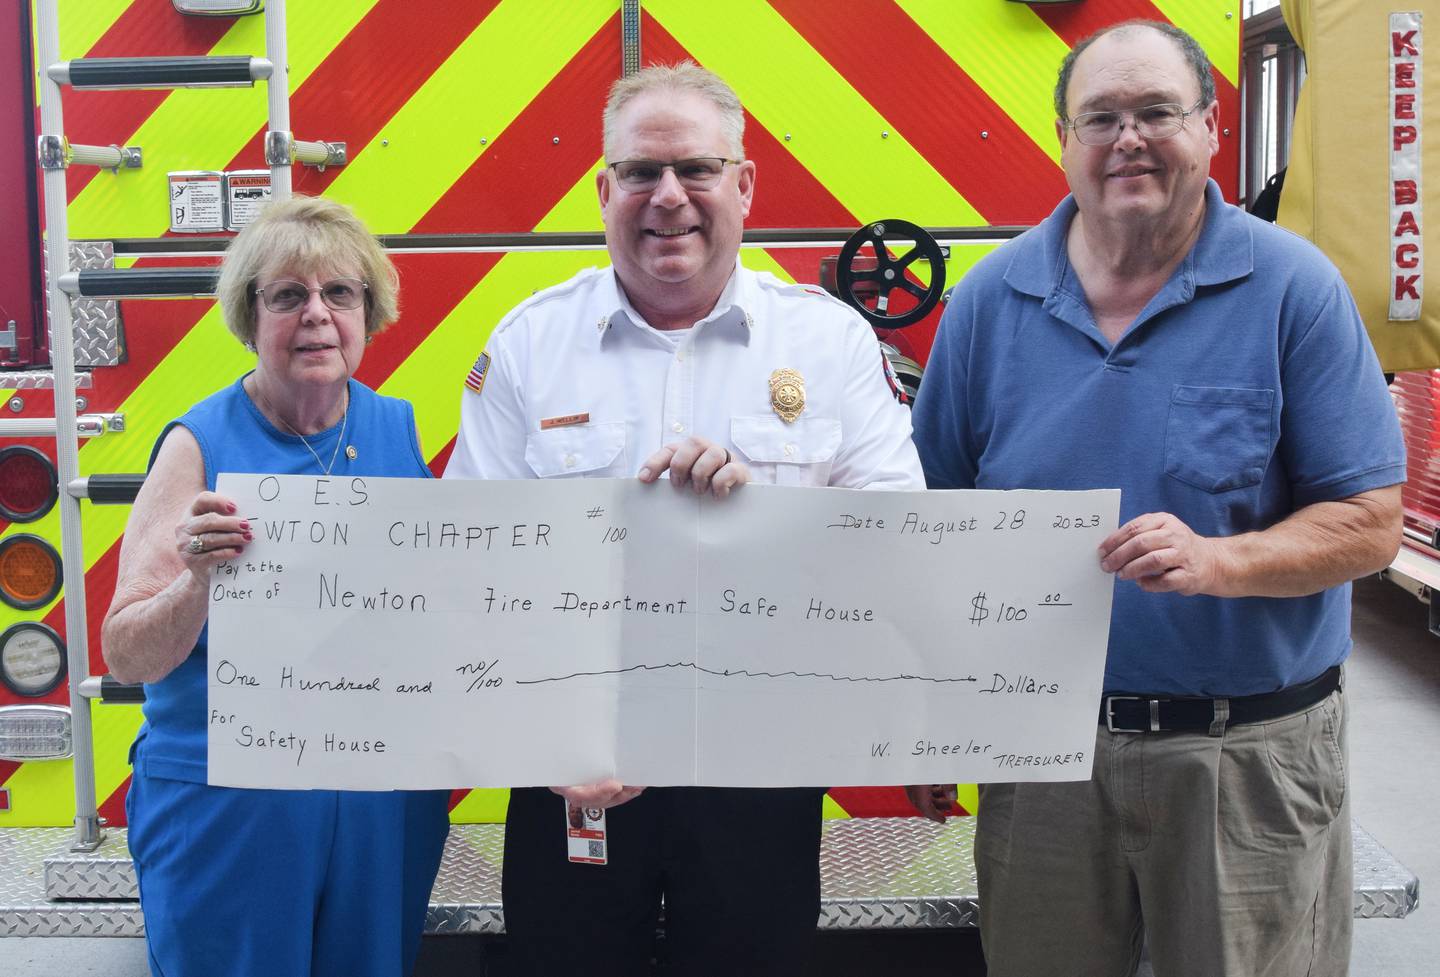 Sue Eldred, the Worthy Matron of the Newton chapter of the Order of the Eastern Star; Newton Fire Chief Jarrod Wellik; and Terry Osborne, the Worthy Patron of the Newton chapter of the Order of the Eastern Star pose for a picture. The fraternal organization wanted to show its support for firefighters and paramedics at Newton Fire Department by providing a free meal and a $100 check for the SAFE House Program. This donation is to assist all Jasper County fire departments in the use and promotion of the SAFE House to benefit the safety of all of the Jasper County children.